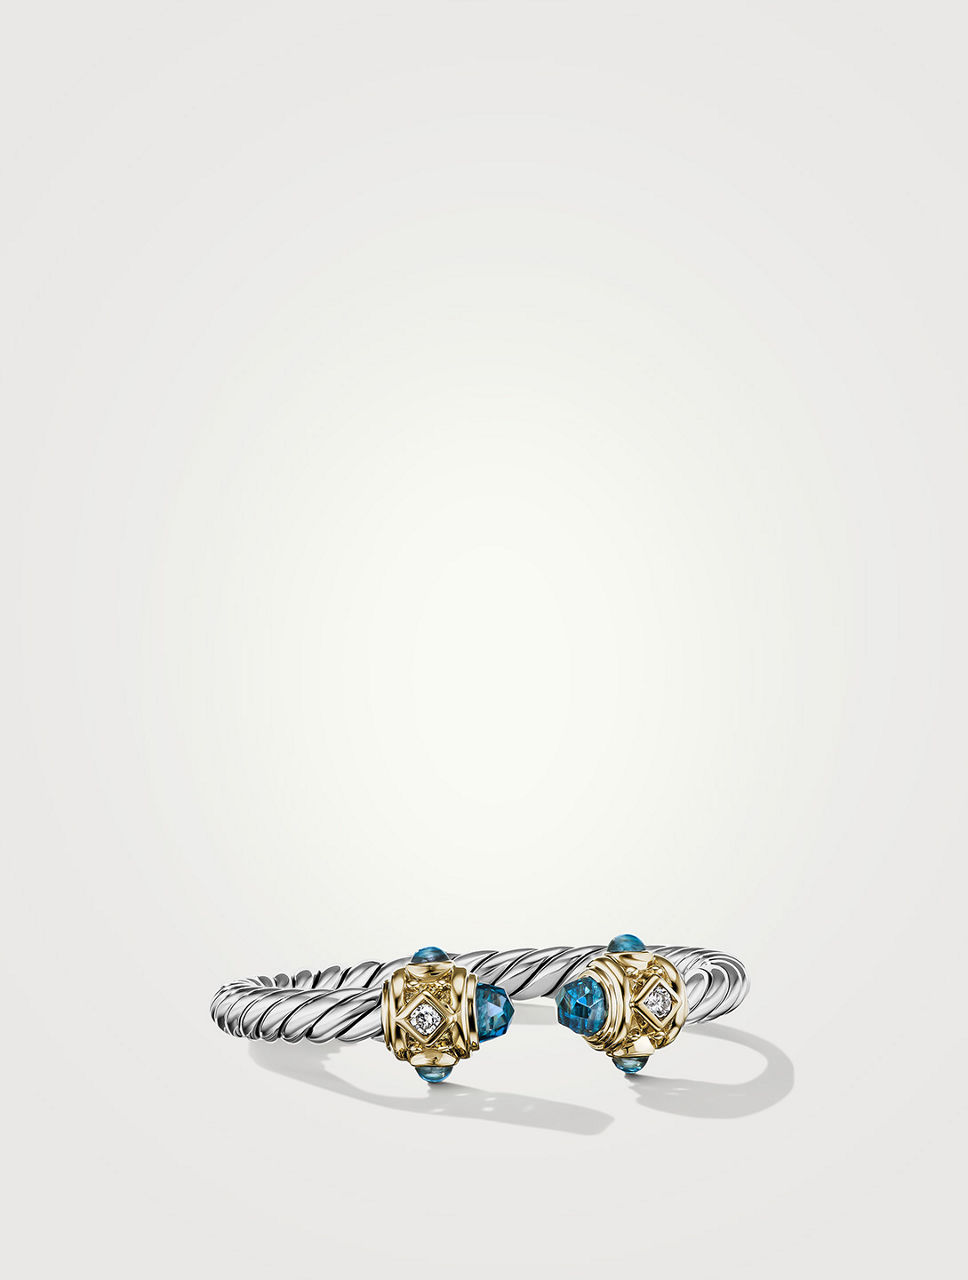 Renaissance Ring Sterling Silver With Hampton Blue Topaz, 14k Yellow Gold And Diamonds